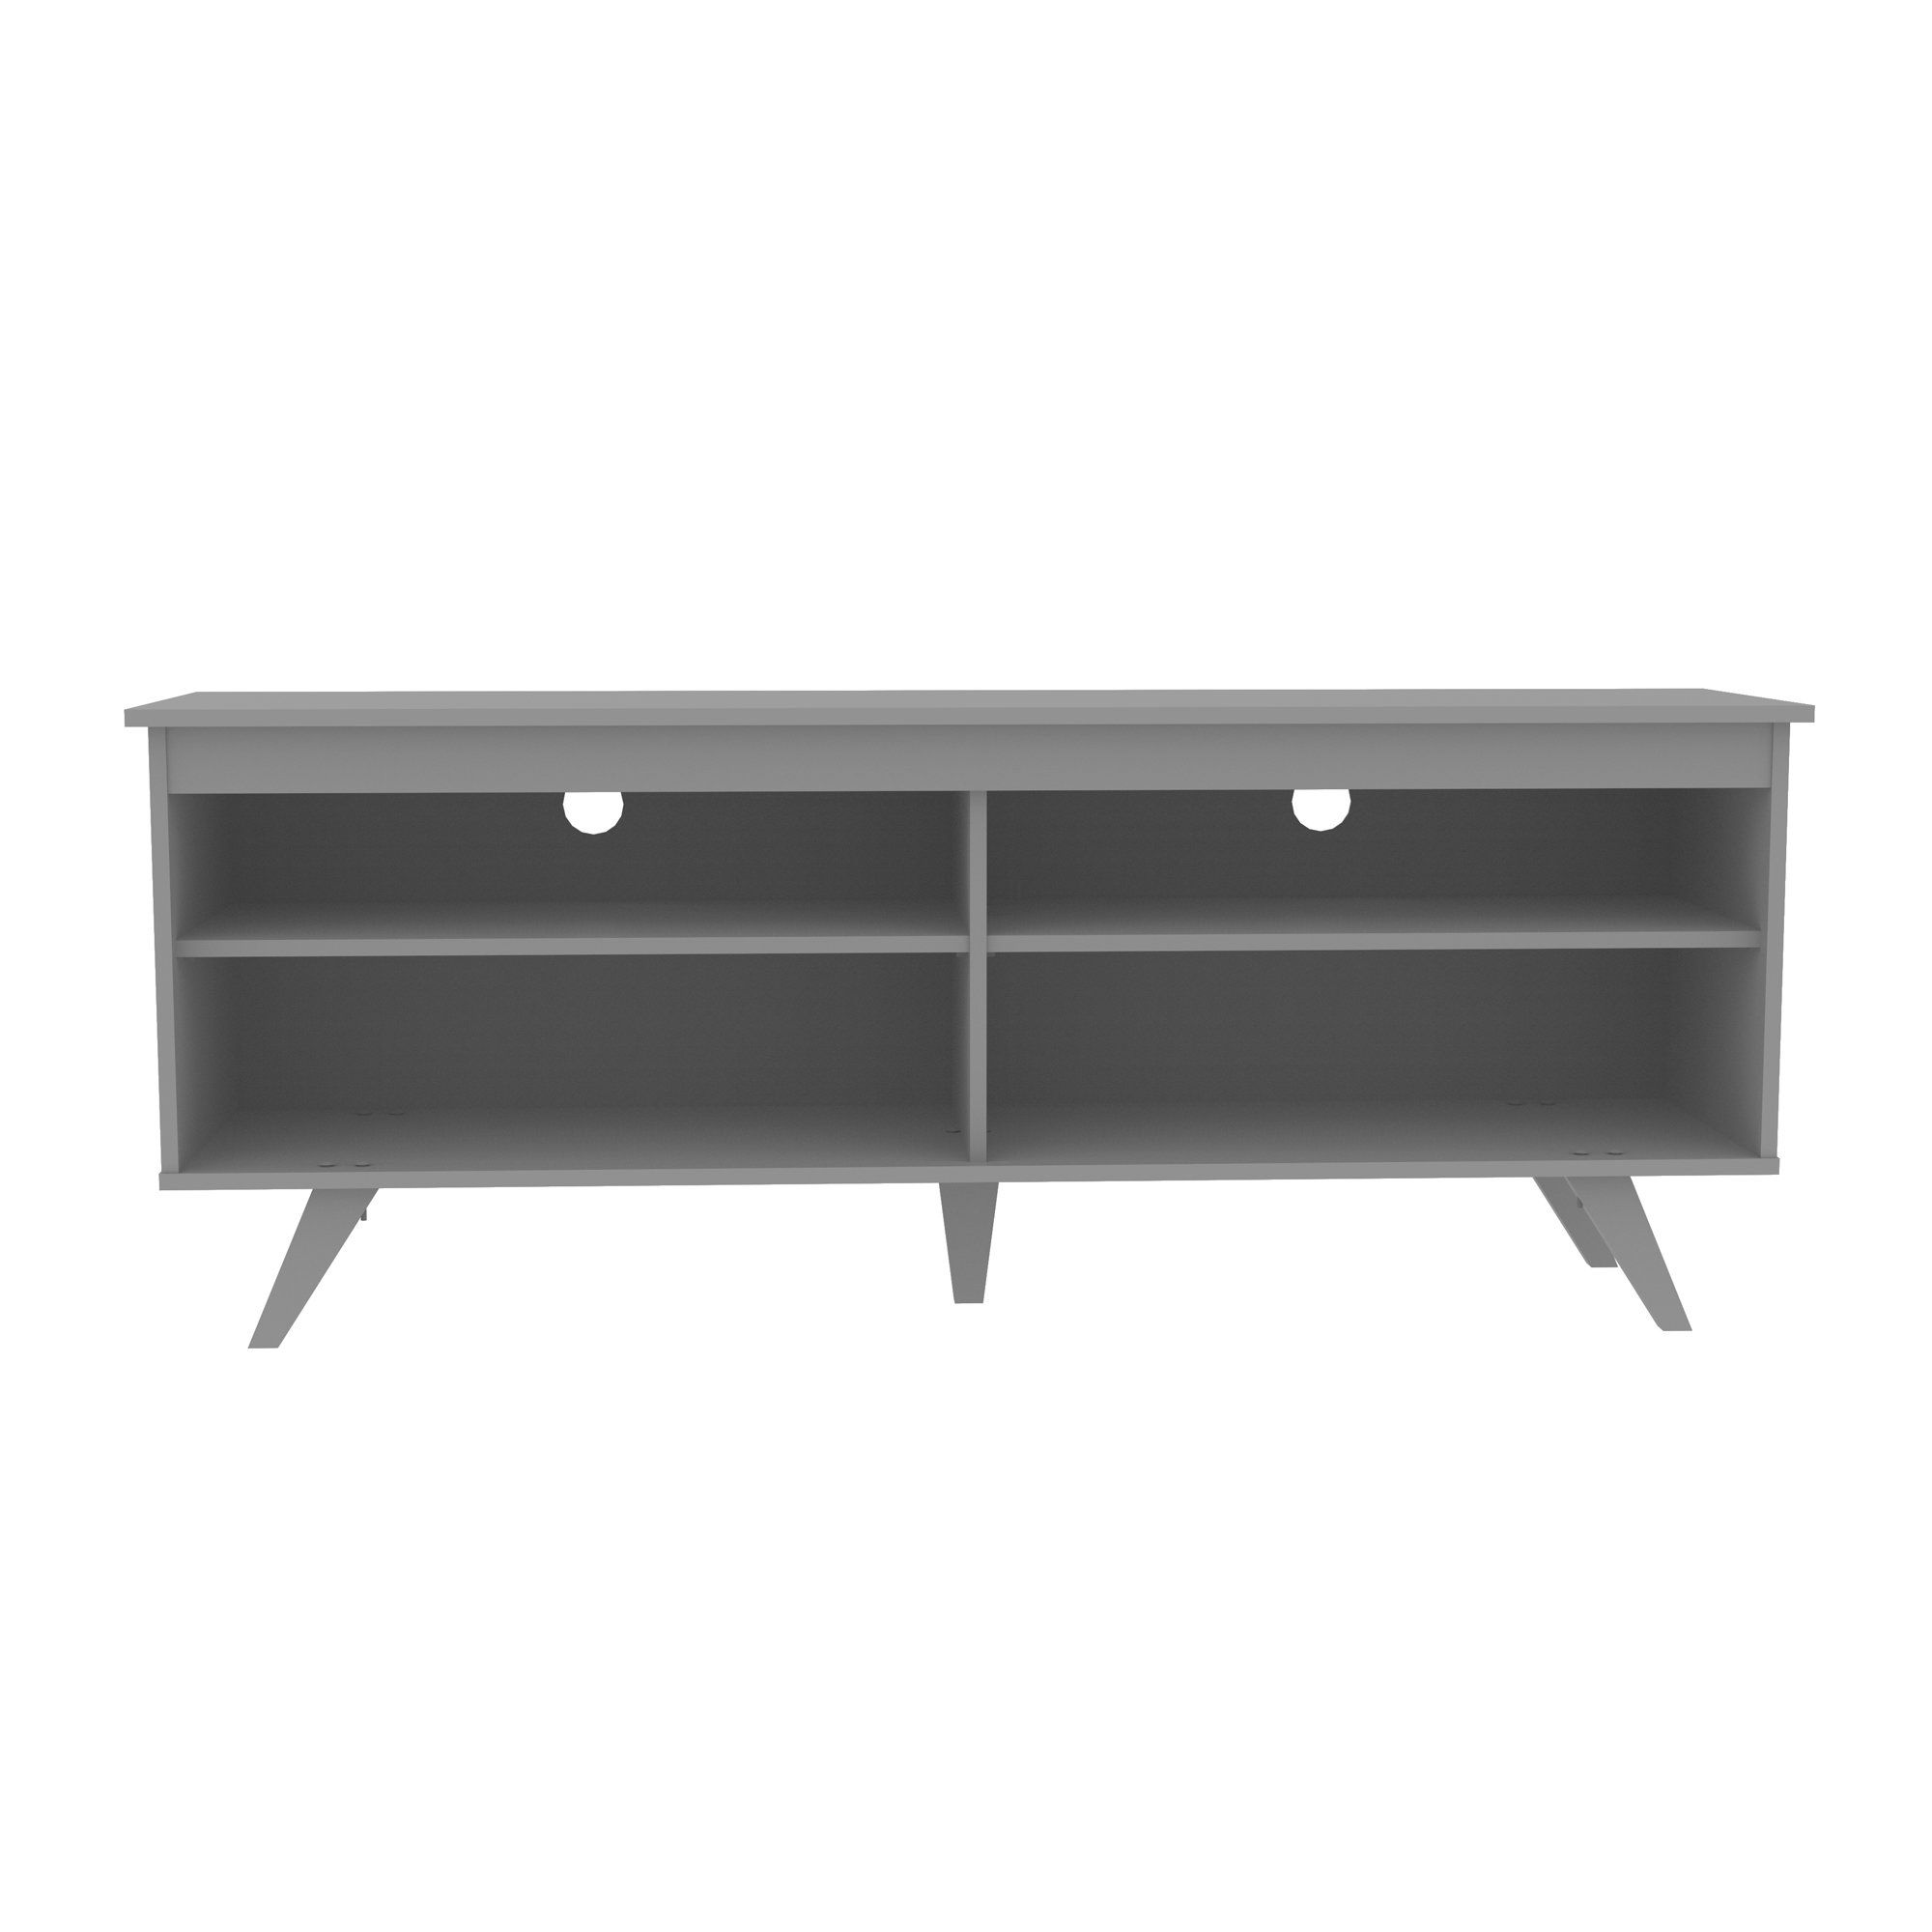 Modern Grey Tv Stands | Allmodern With Sinclair White 68 Inch Tv Stands (View 16 of 30)